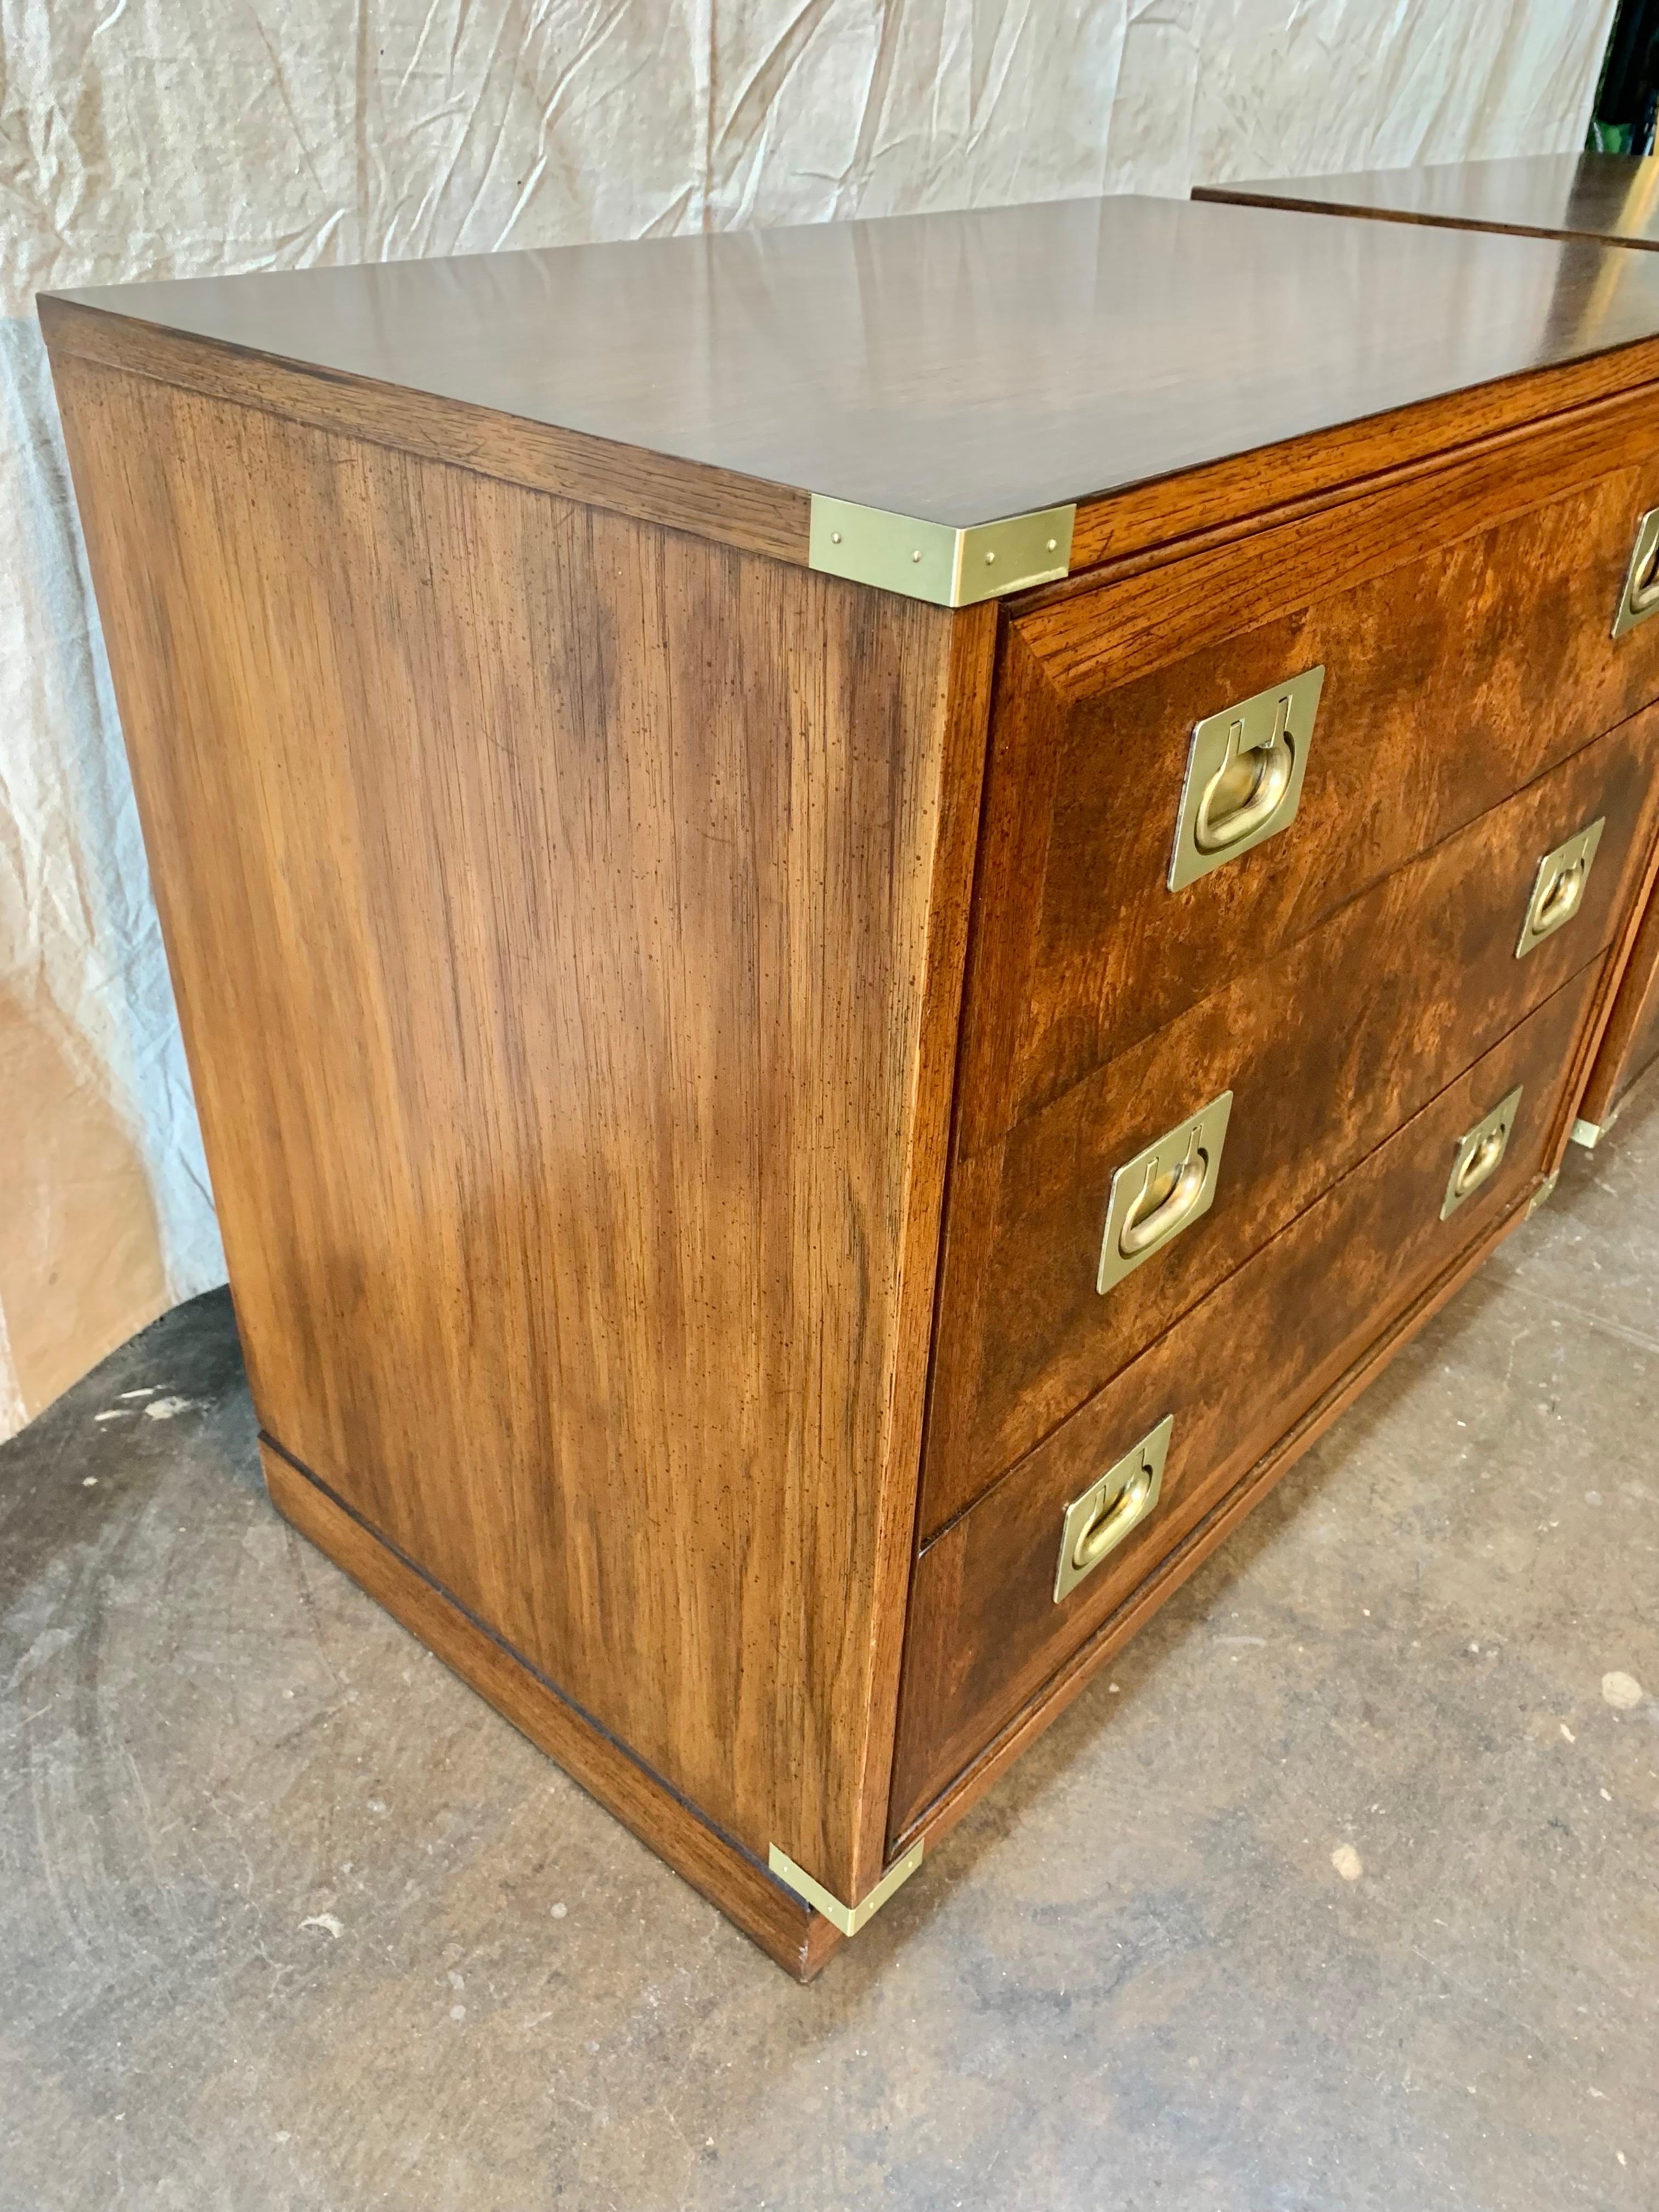 Mid 20th C. Walnut, Burlwood and Brass Campaign Style Bachelor Chests - a Pair 6